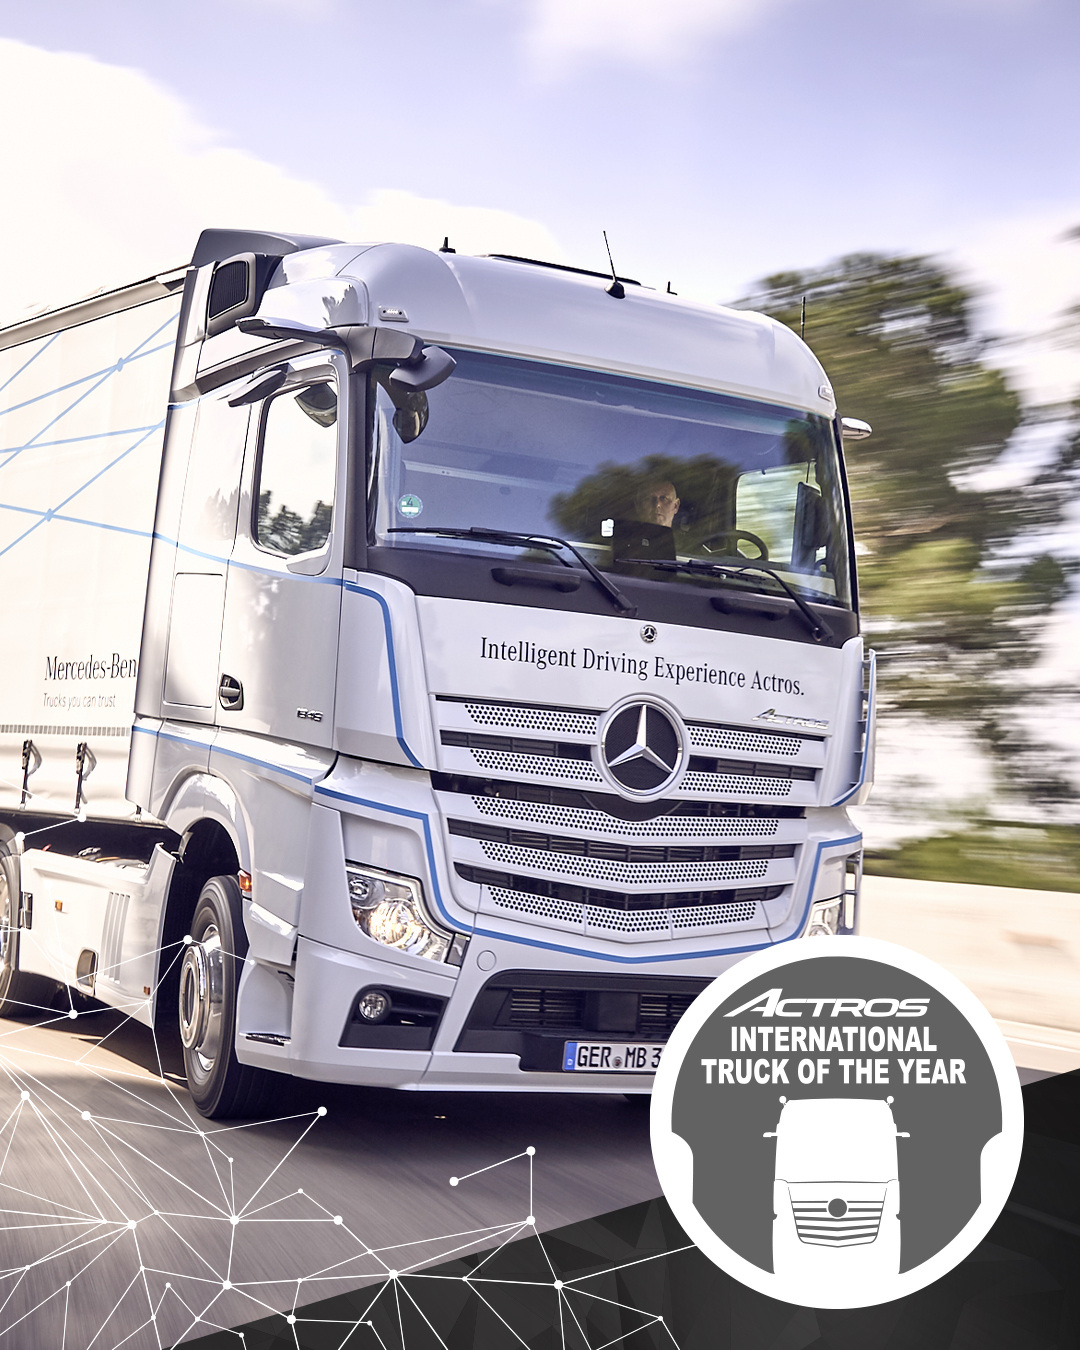 The new Actros – Truck of the Year 2020